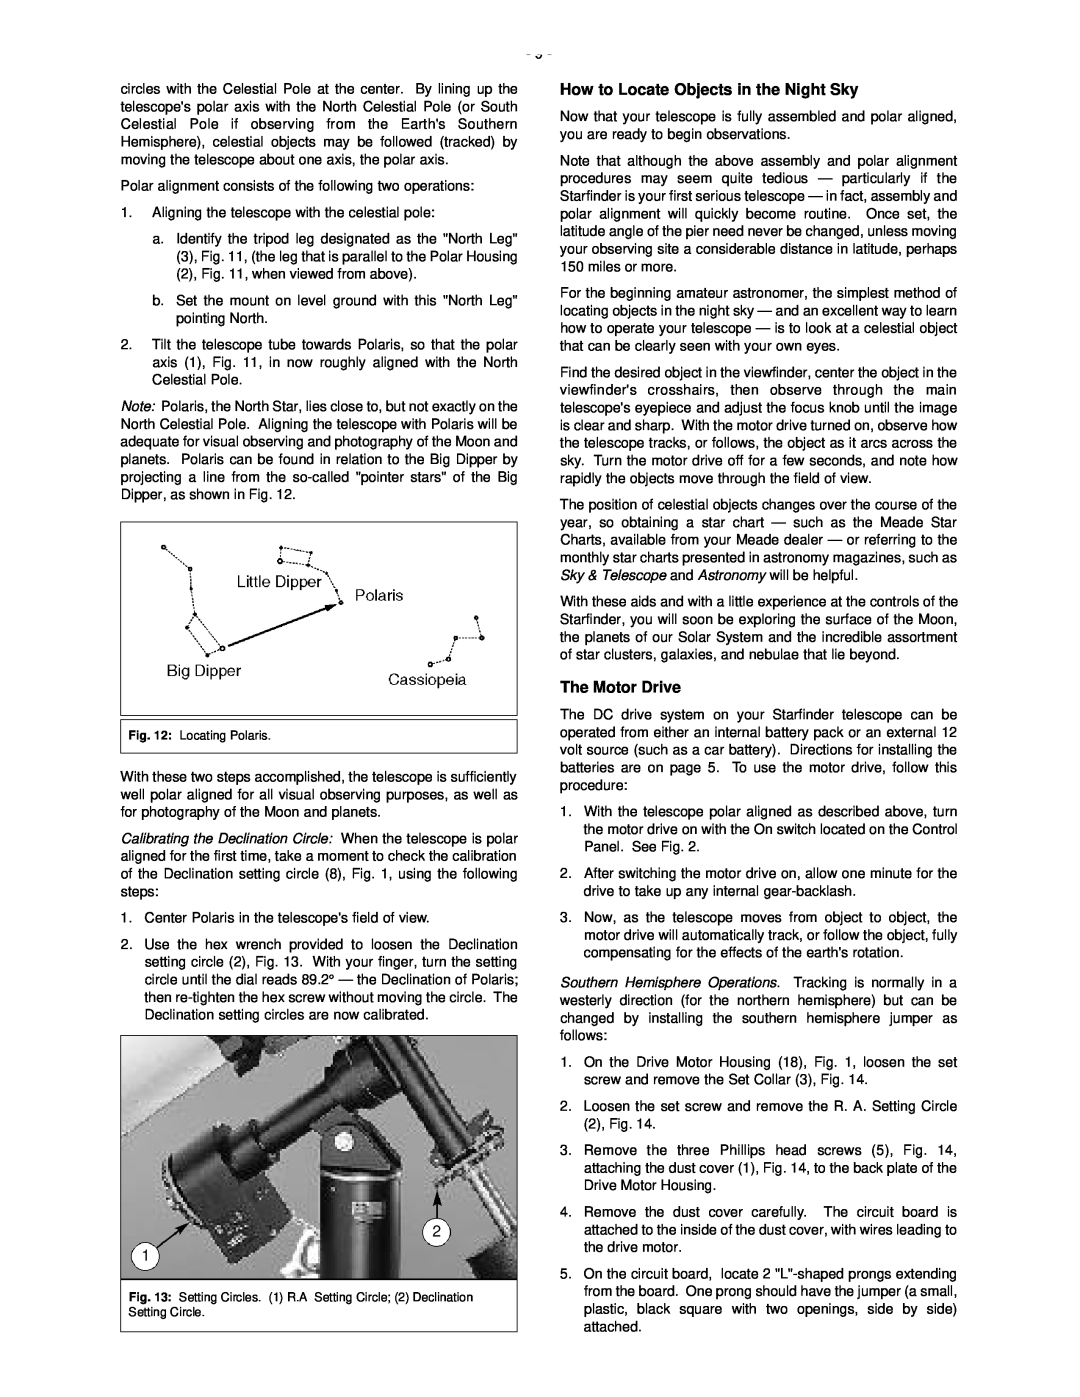 Meade 50 AZ-T instruction manual How to Locate Objects in the Night Sky, The Motor Drive 